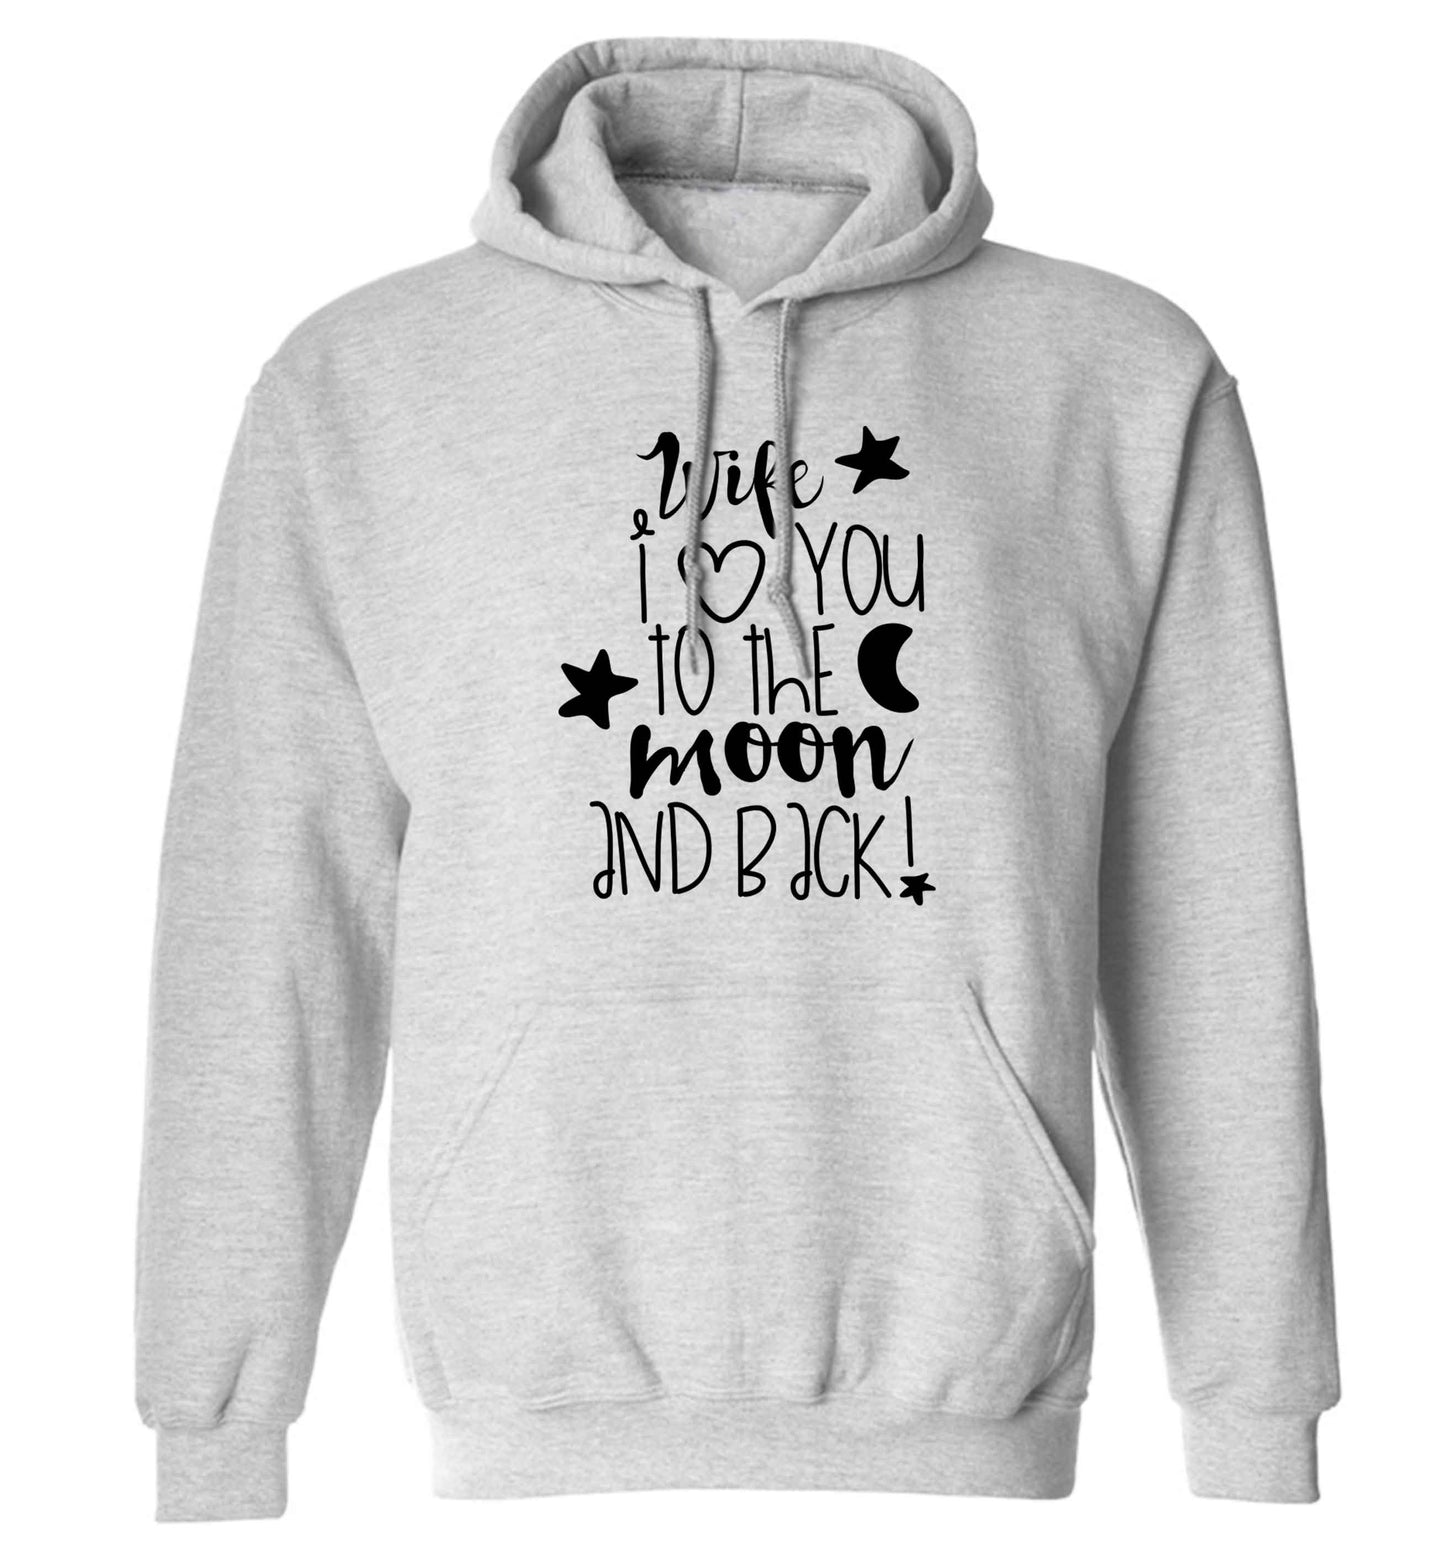 Wife I love you to the moon and back adults unisex grey hoodie 2XL